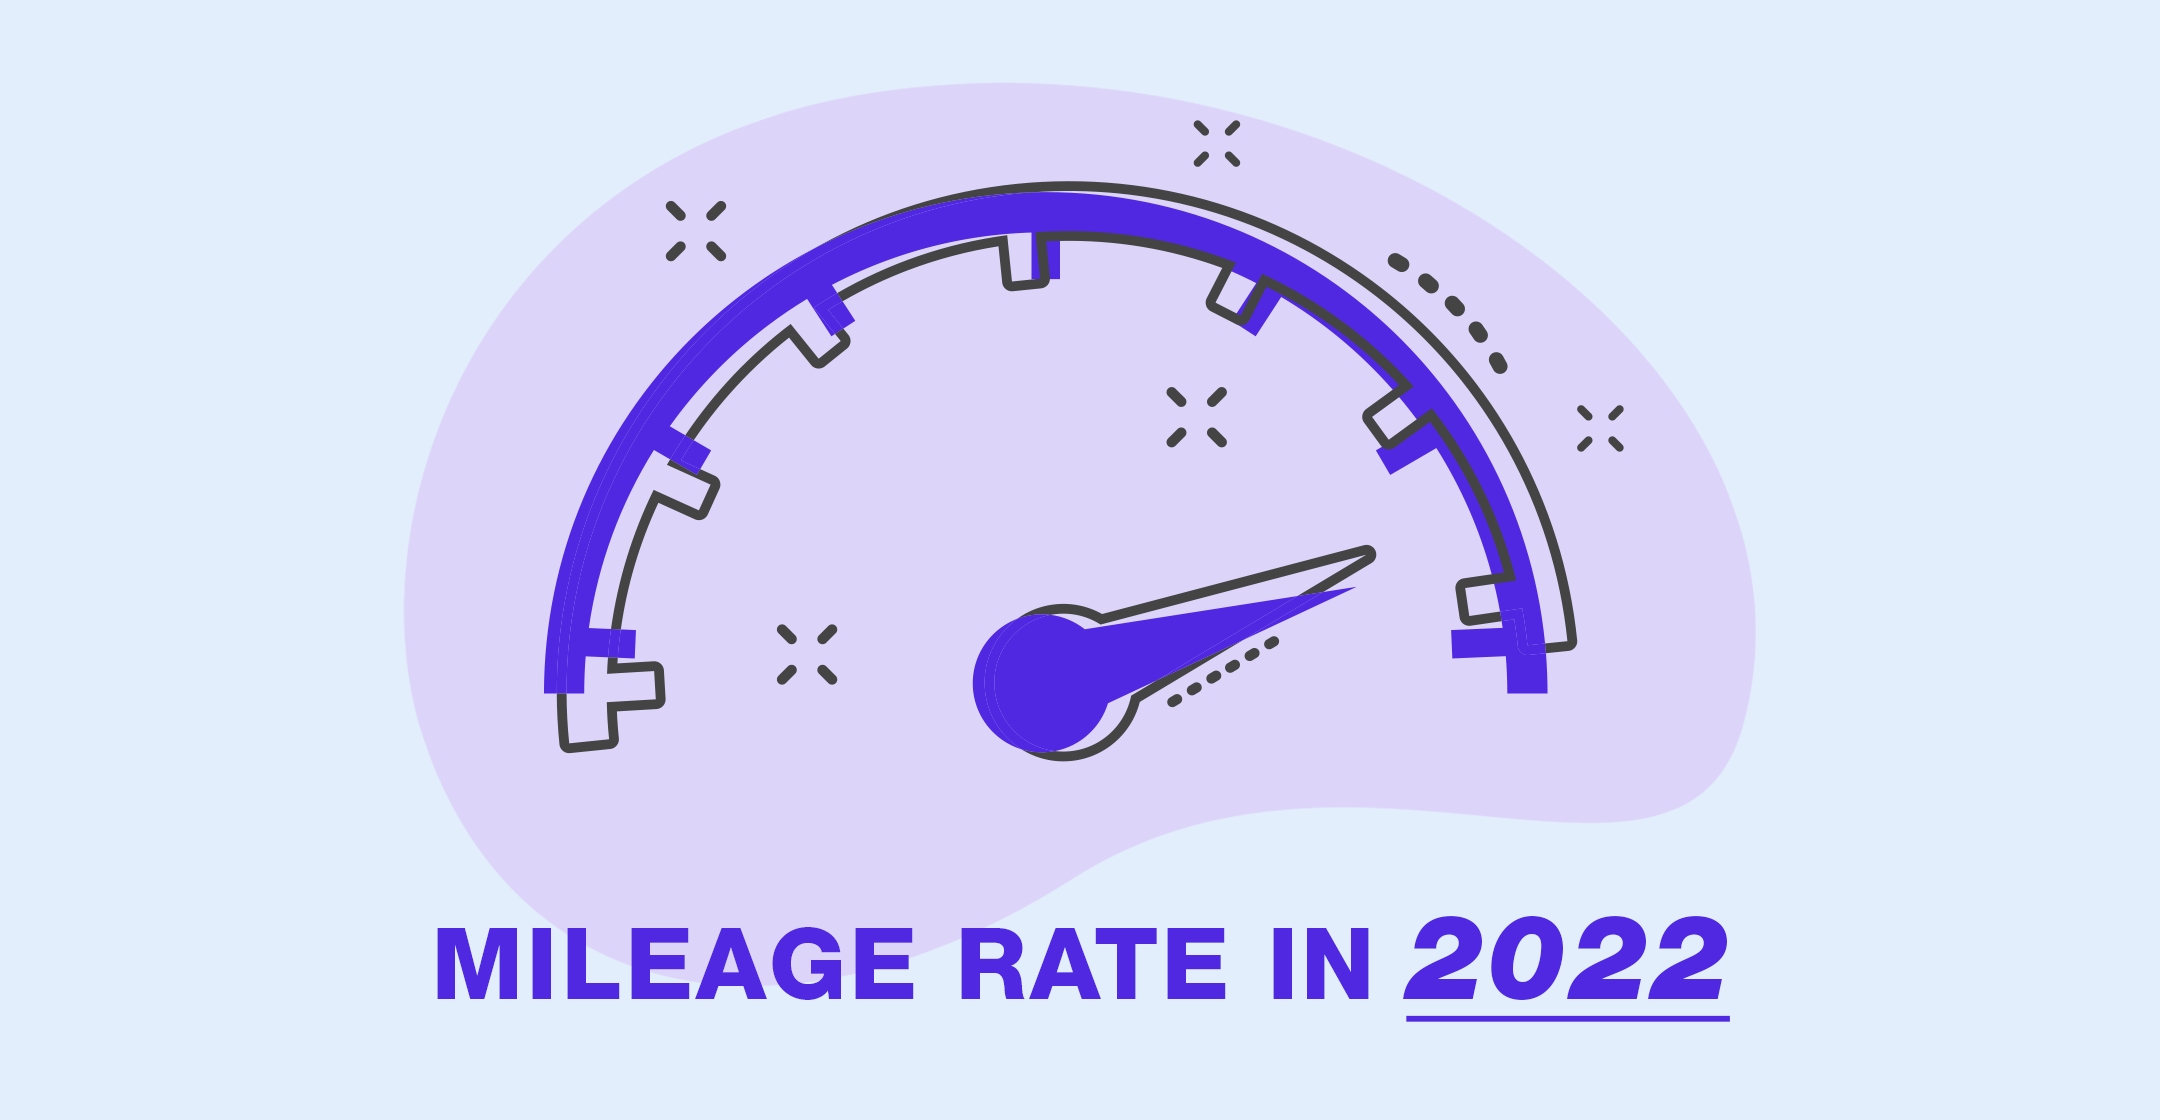 The Current Federal Mileage Rate in 2022